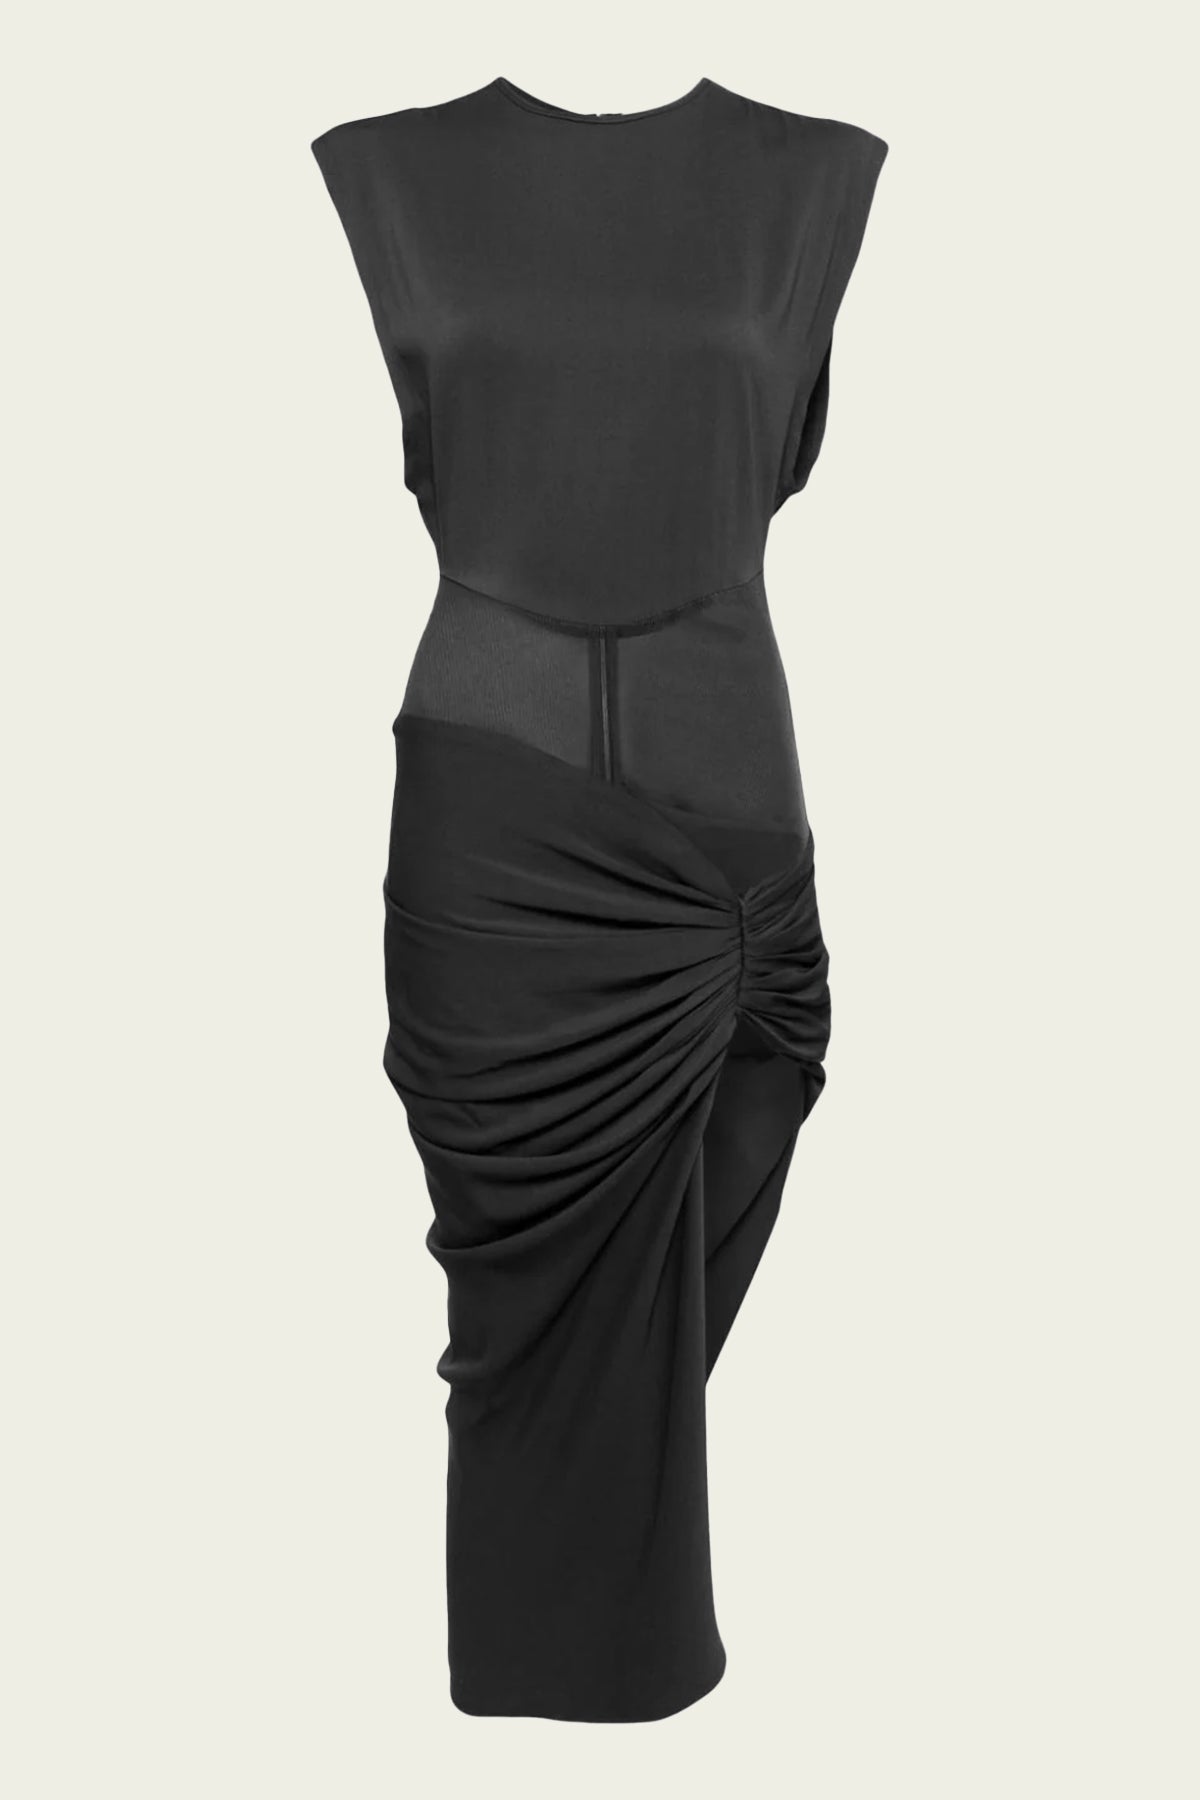 Fusion Ruched Micro Dress in Jet - shop-olivia.com